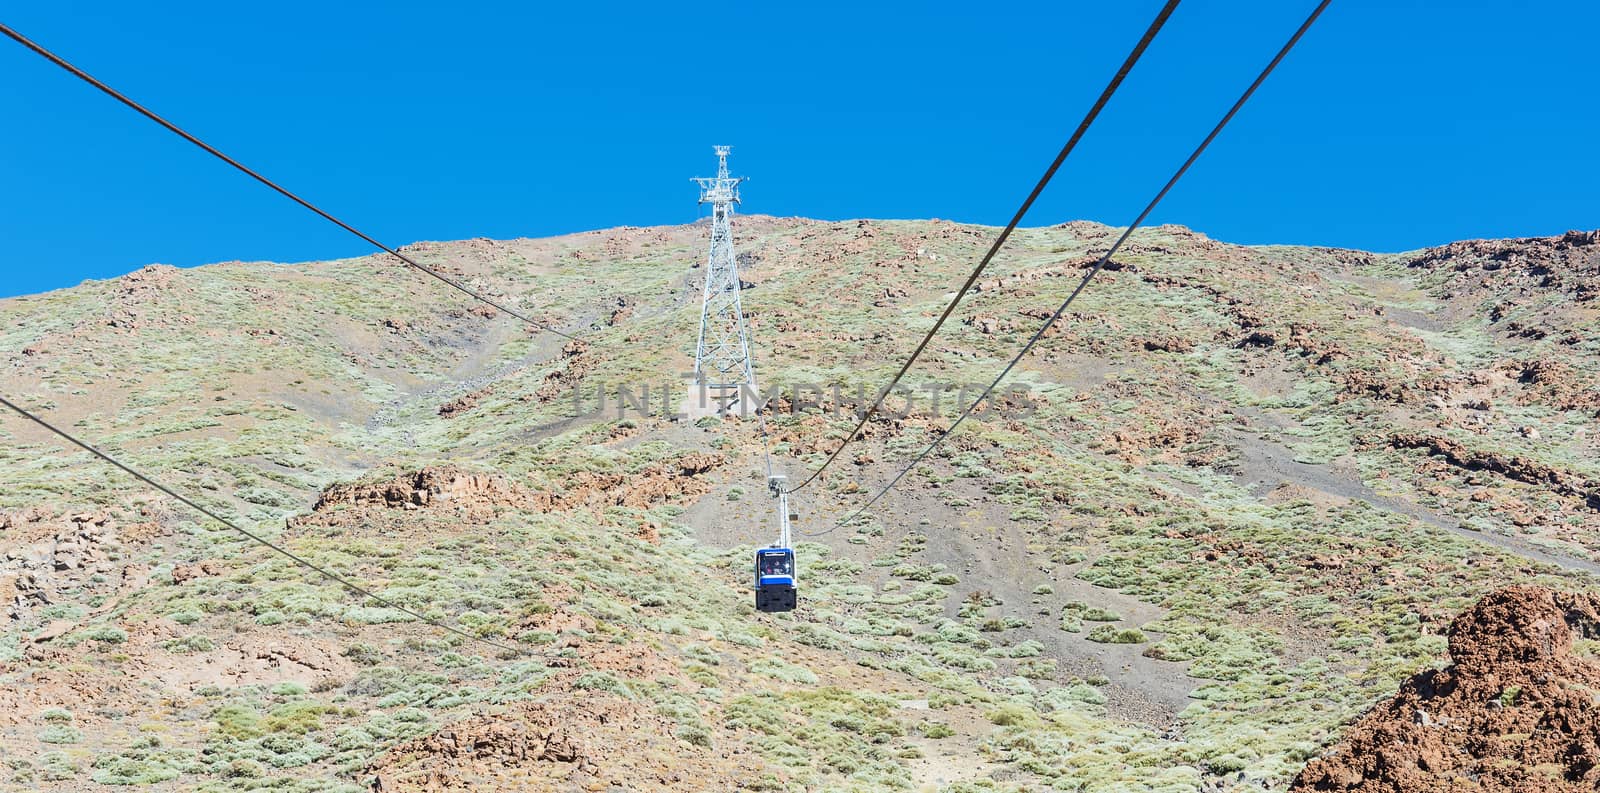 The cable car on the island of Tenerife for the ascent and desce by Grommik